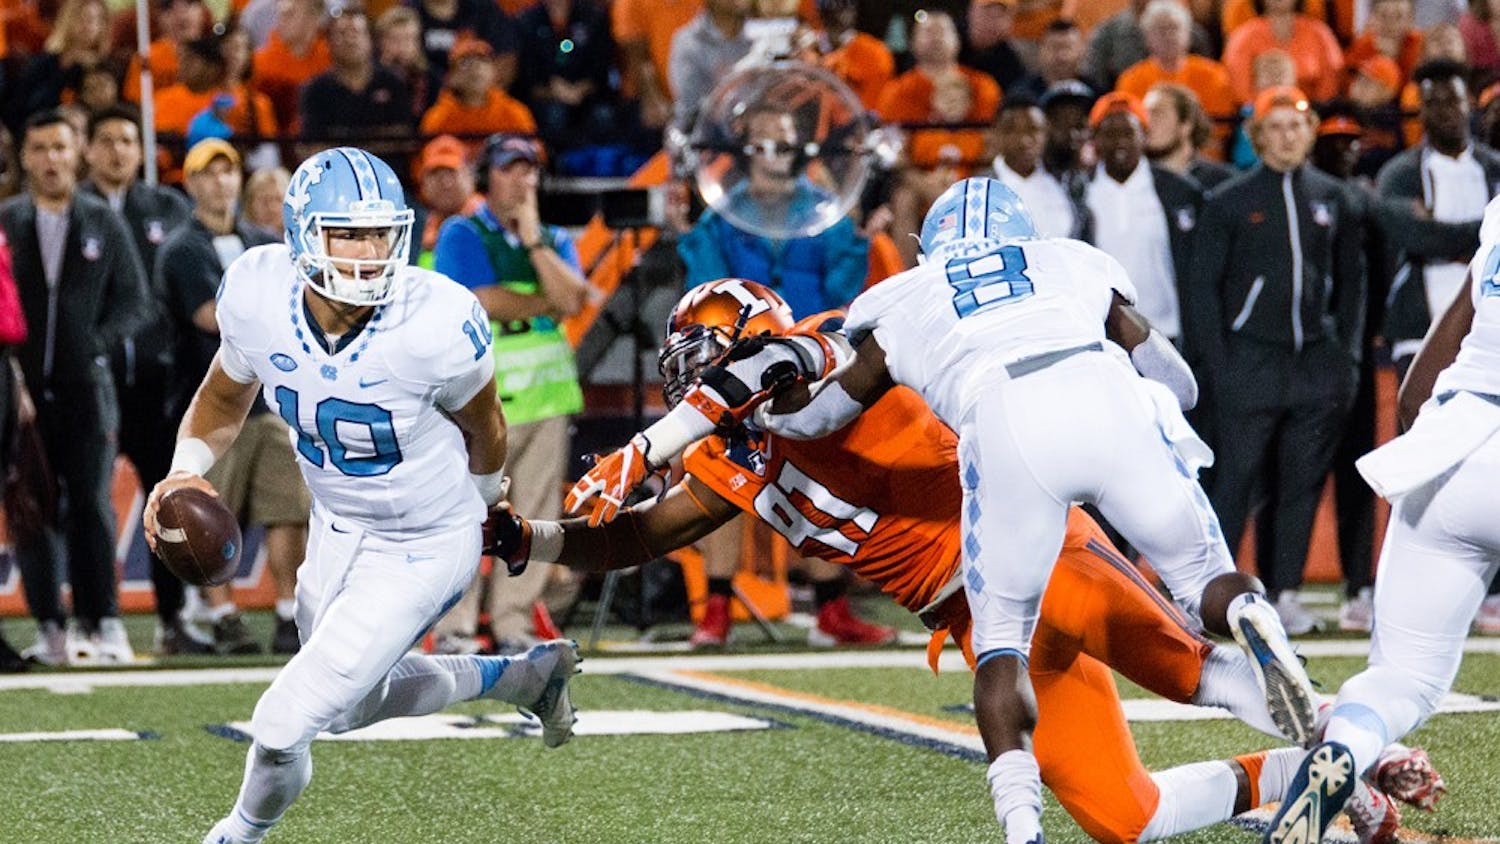 North Carolina quarterback Mitch Trubisky (10) dodges a tackle from Illinois defensive lineman Dawuane Smoot (91) during the game against Illinois at Memorial Stadium on Saturday, September 10. The Tar Heels won 48-23.